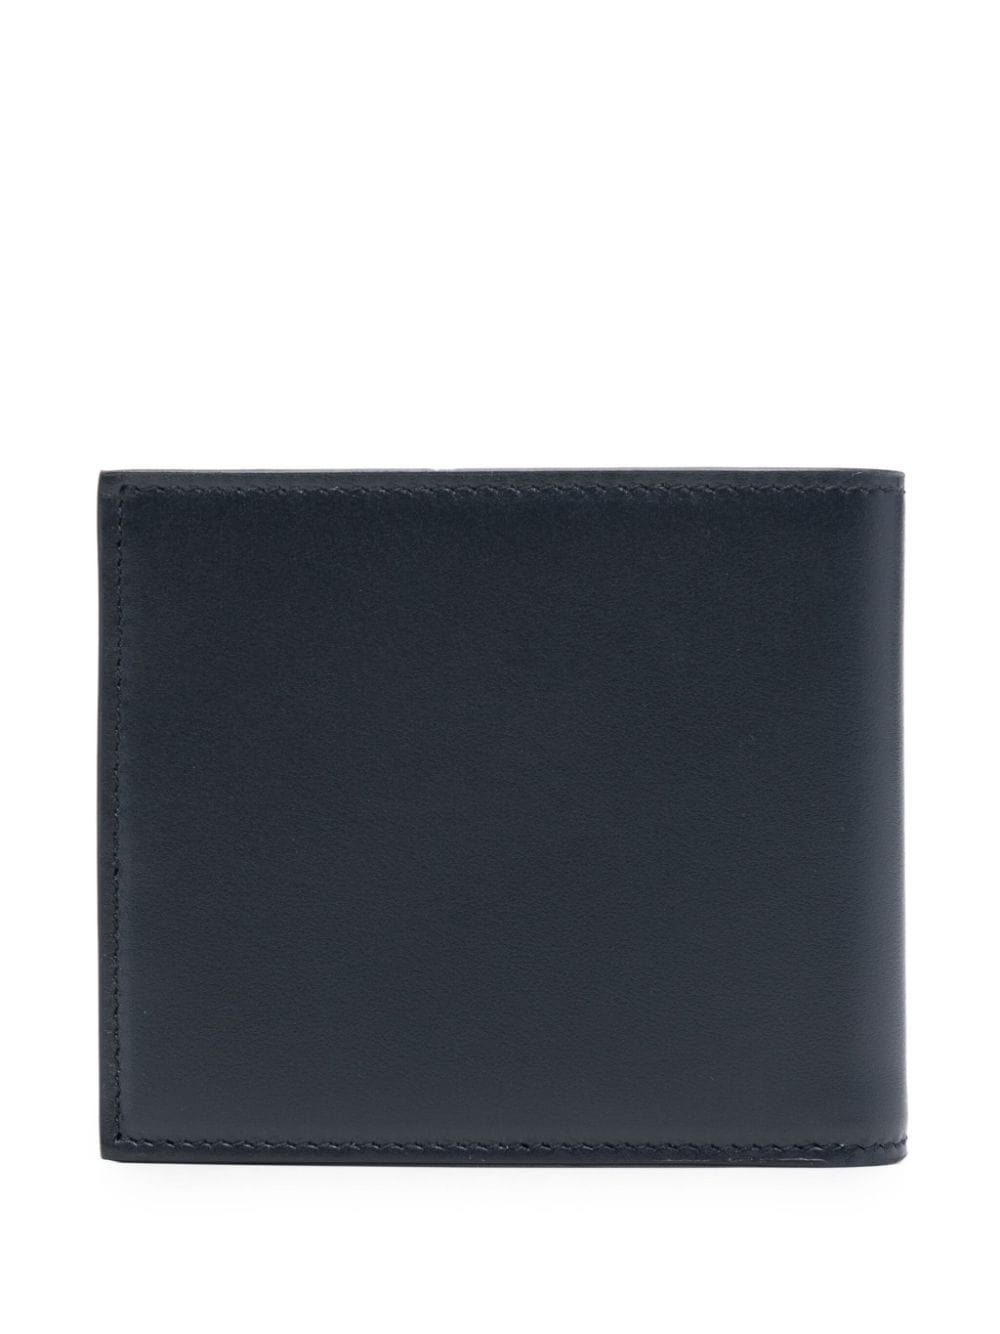 embossed-logo leather wallet - 2